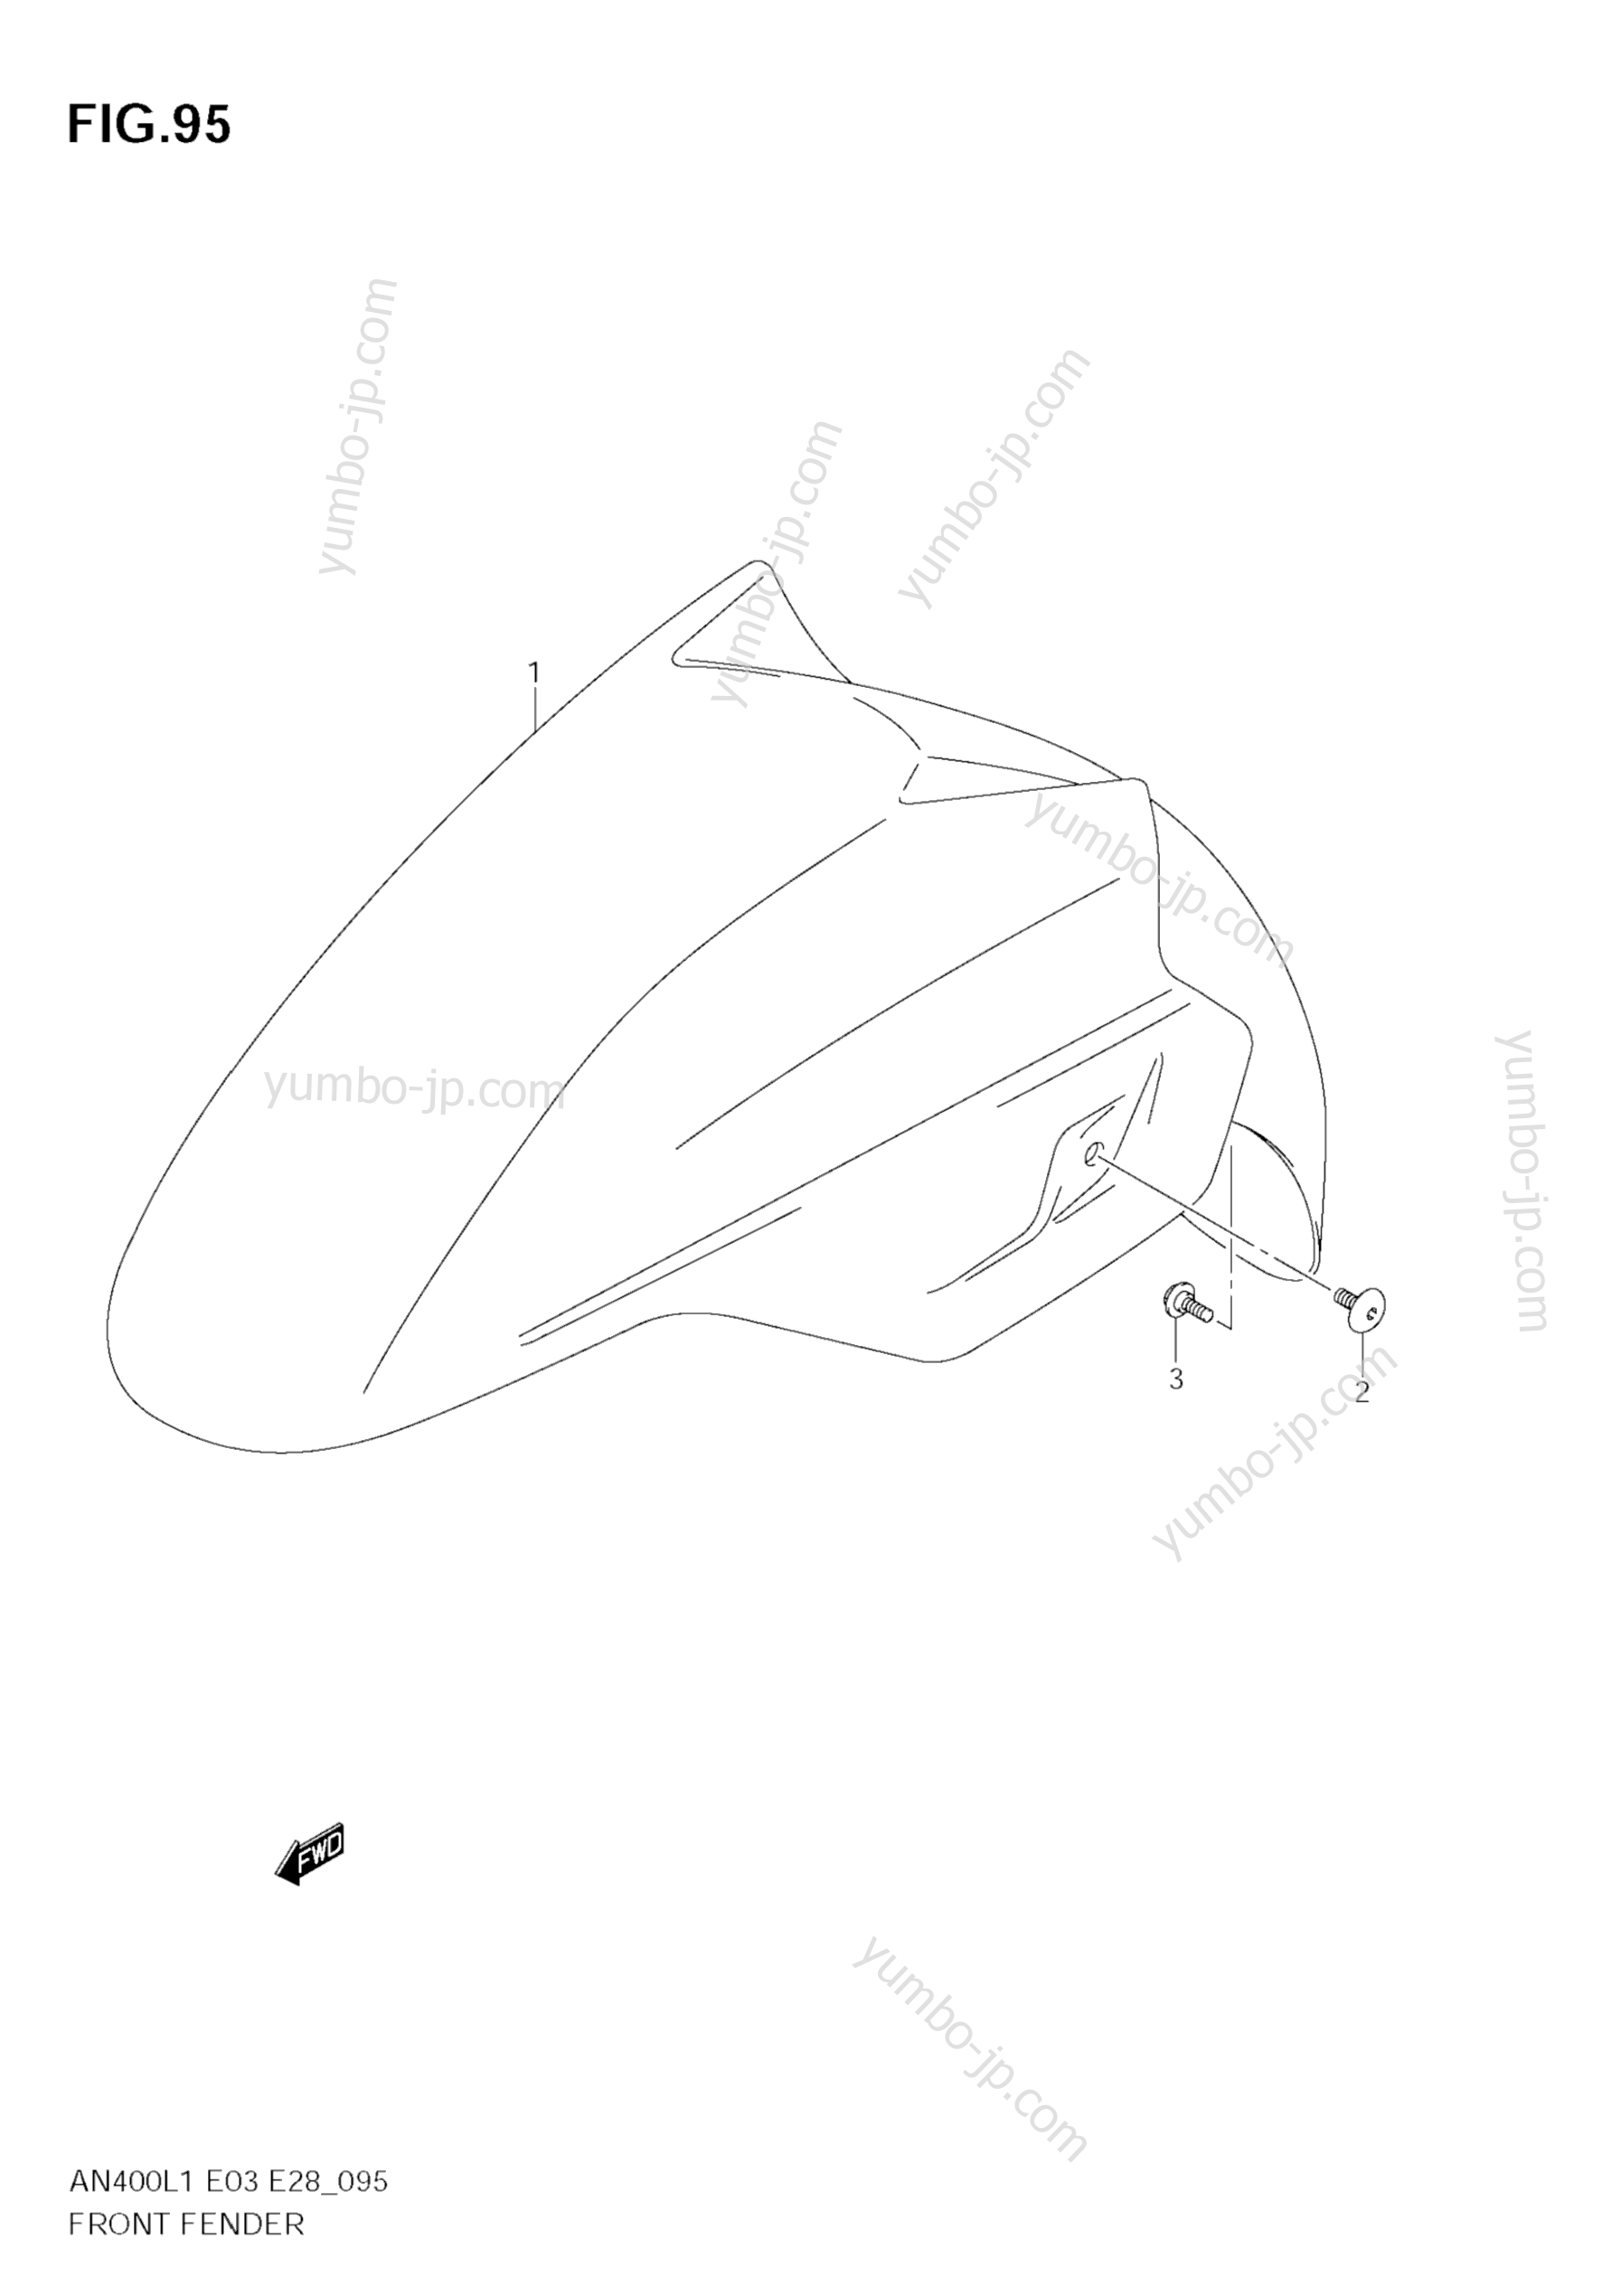 FRONT FENDER (AN400 L1 E3) for scooters SUZUKI Burgman (AN400) 2011 year